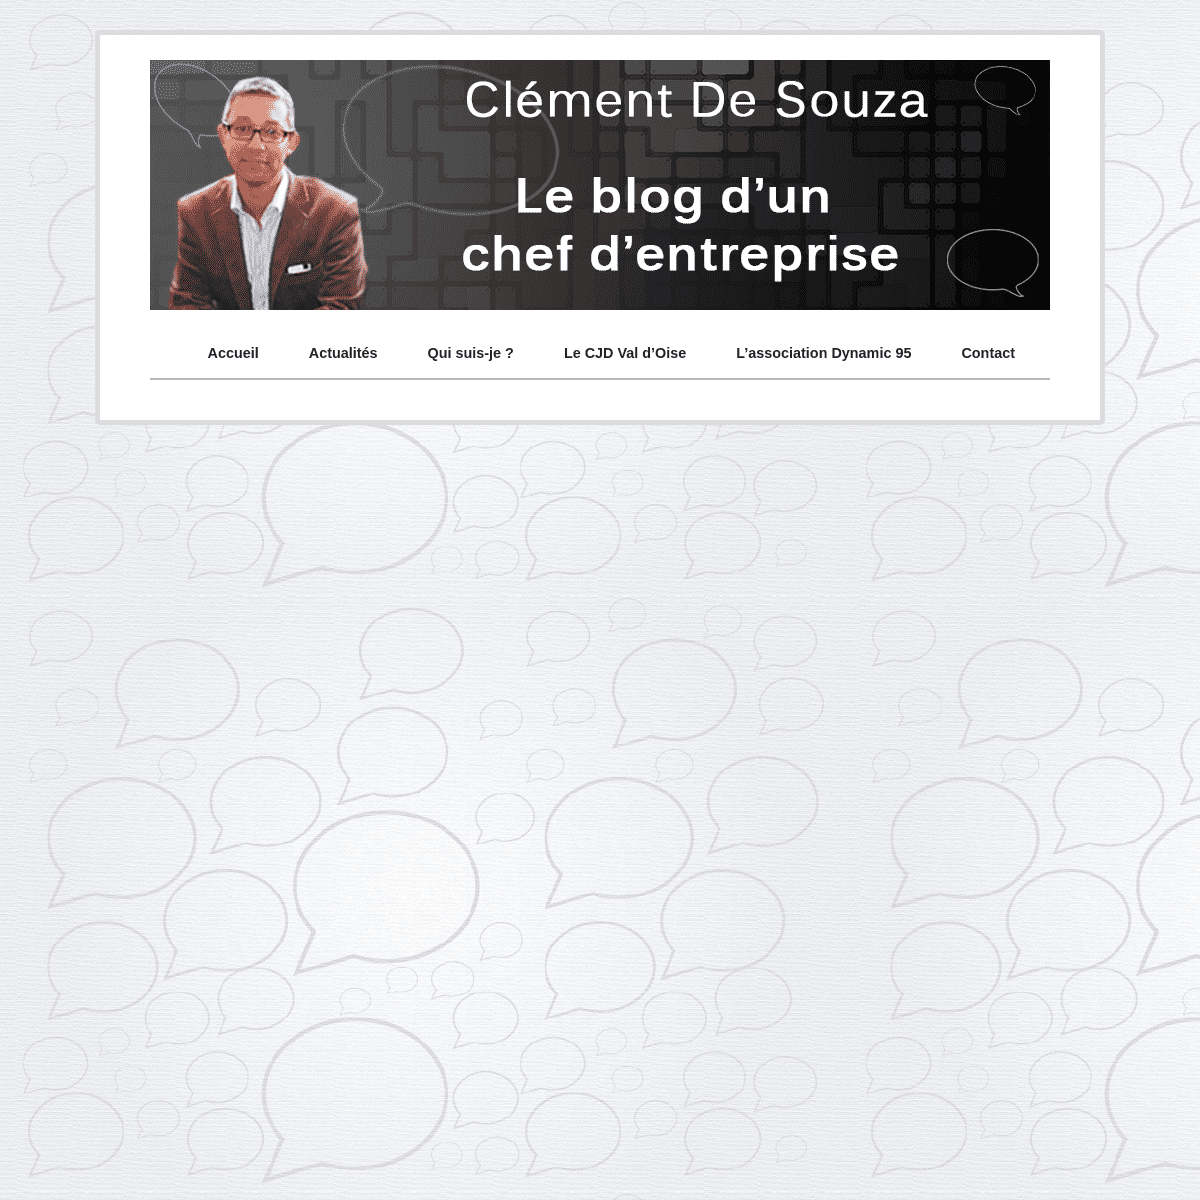 A complete backup of https://clementdesouza.fr